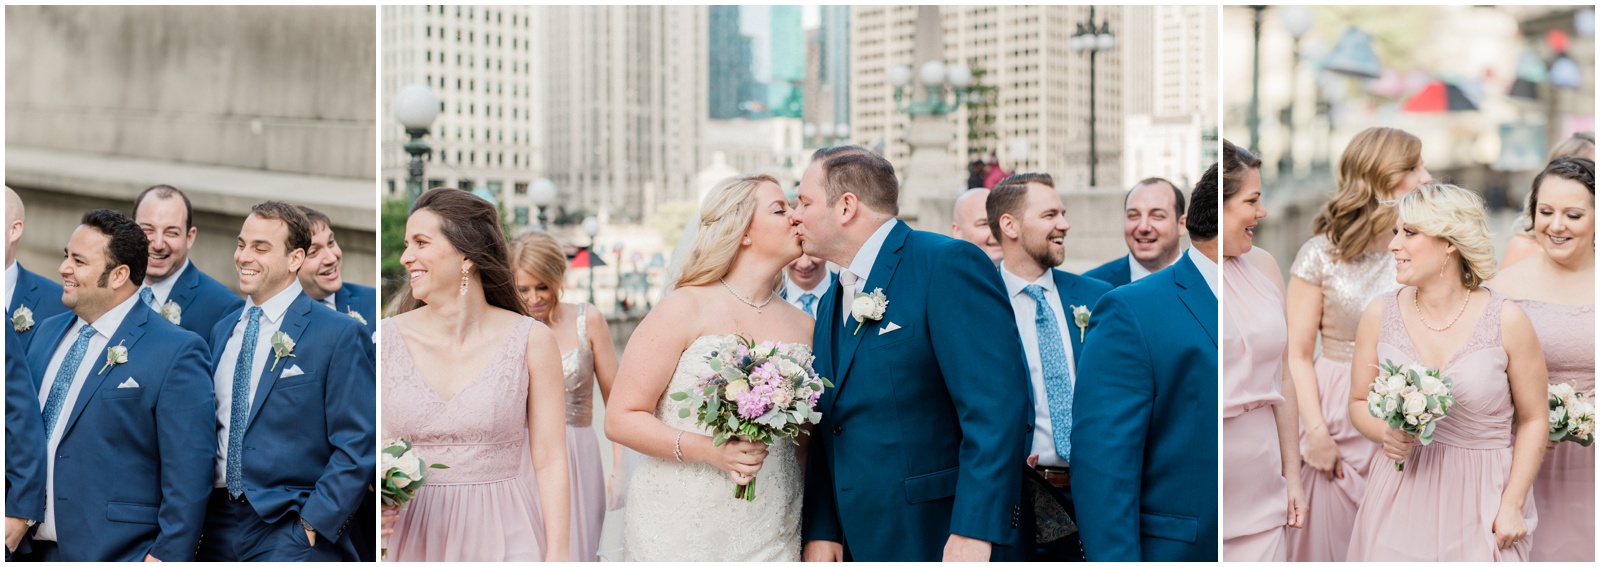 blush and navy wedding downtown chicago